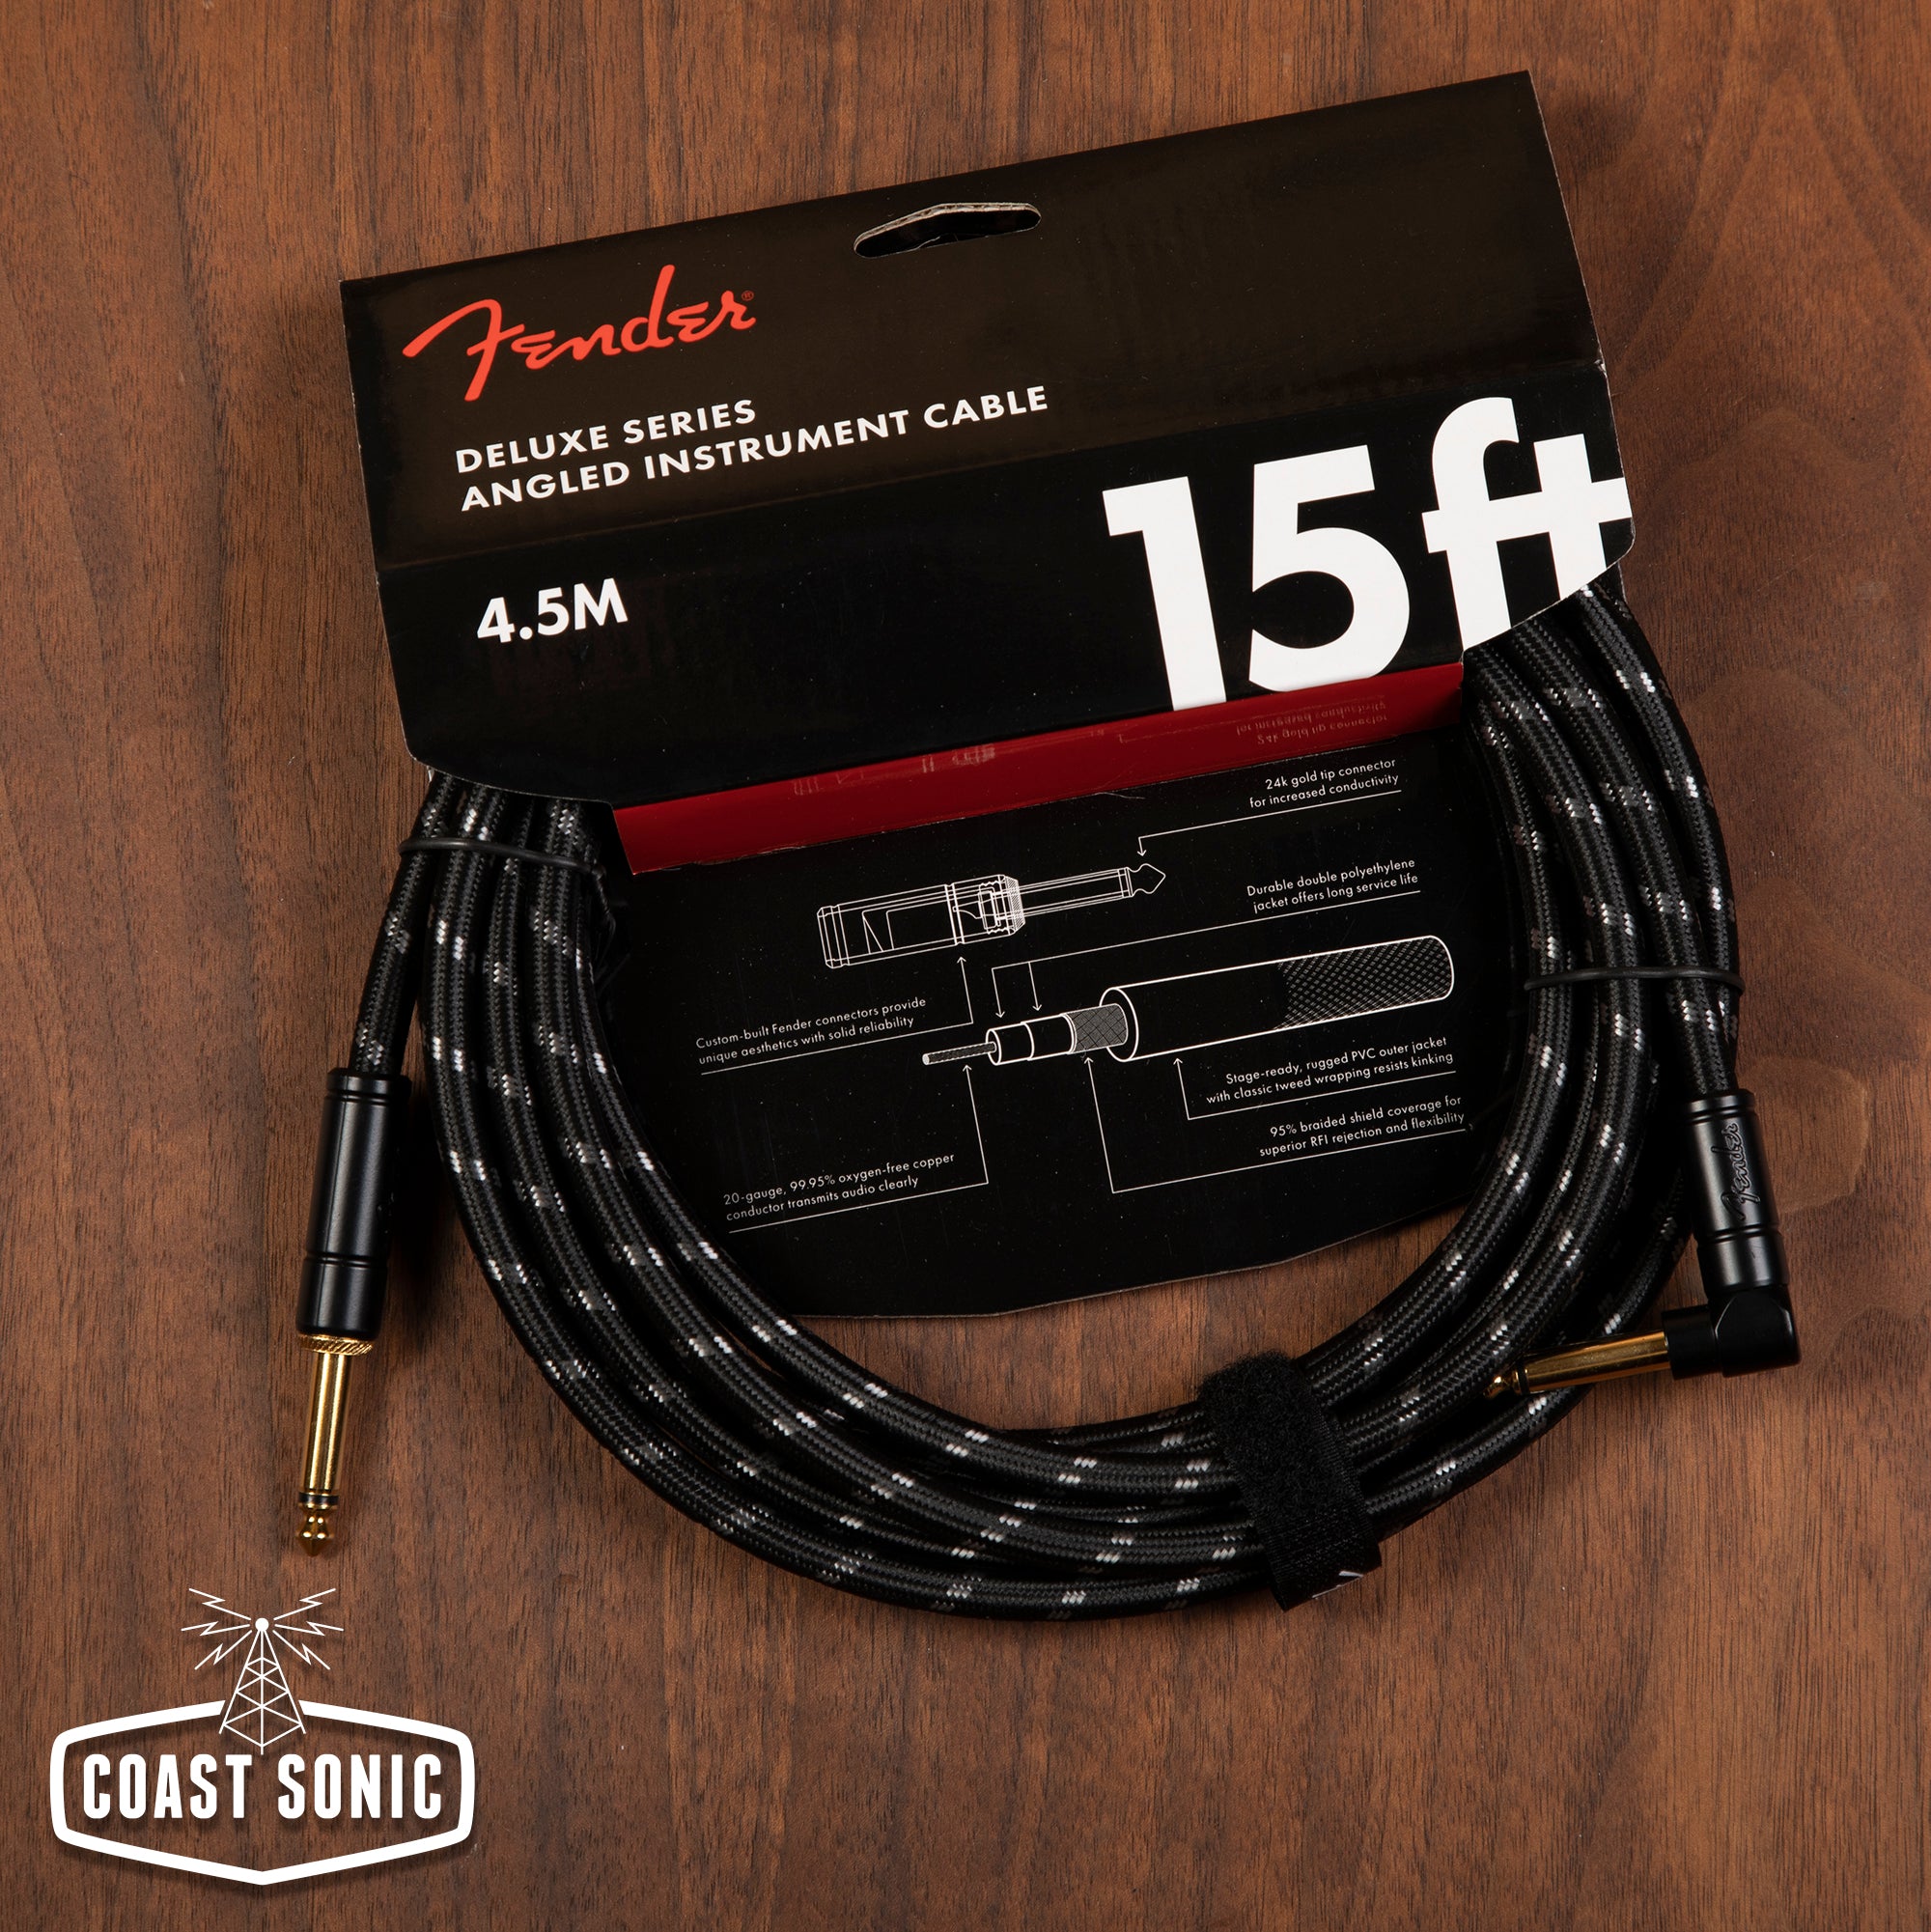 Fender Deluxe Series Instrument Cable- 15' Black Tweed ST/ANG